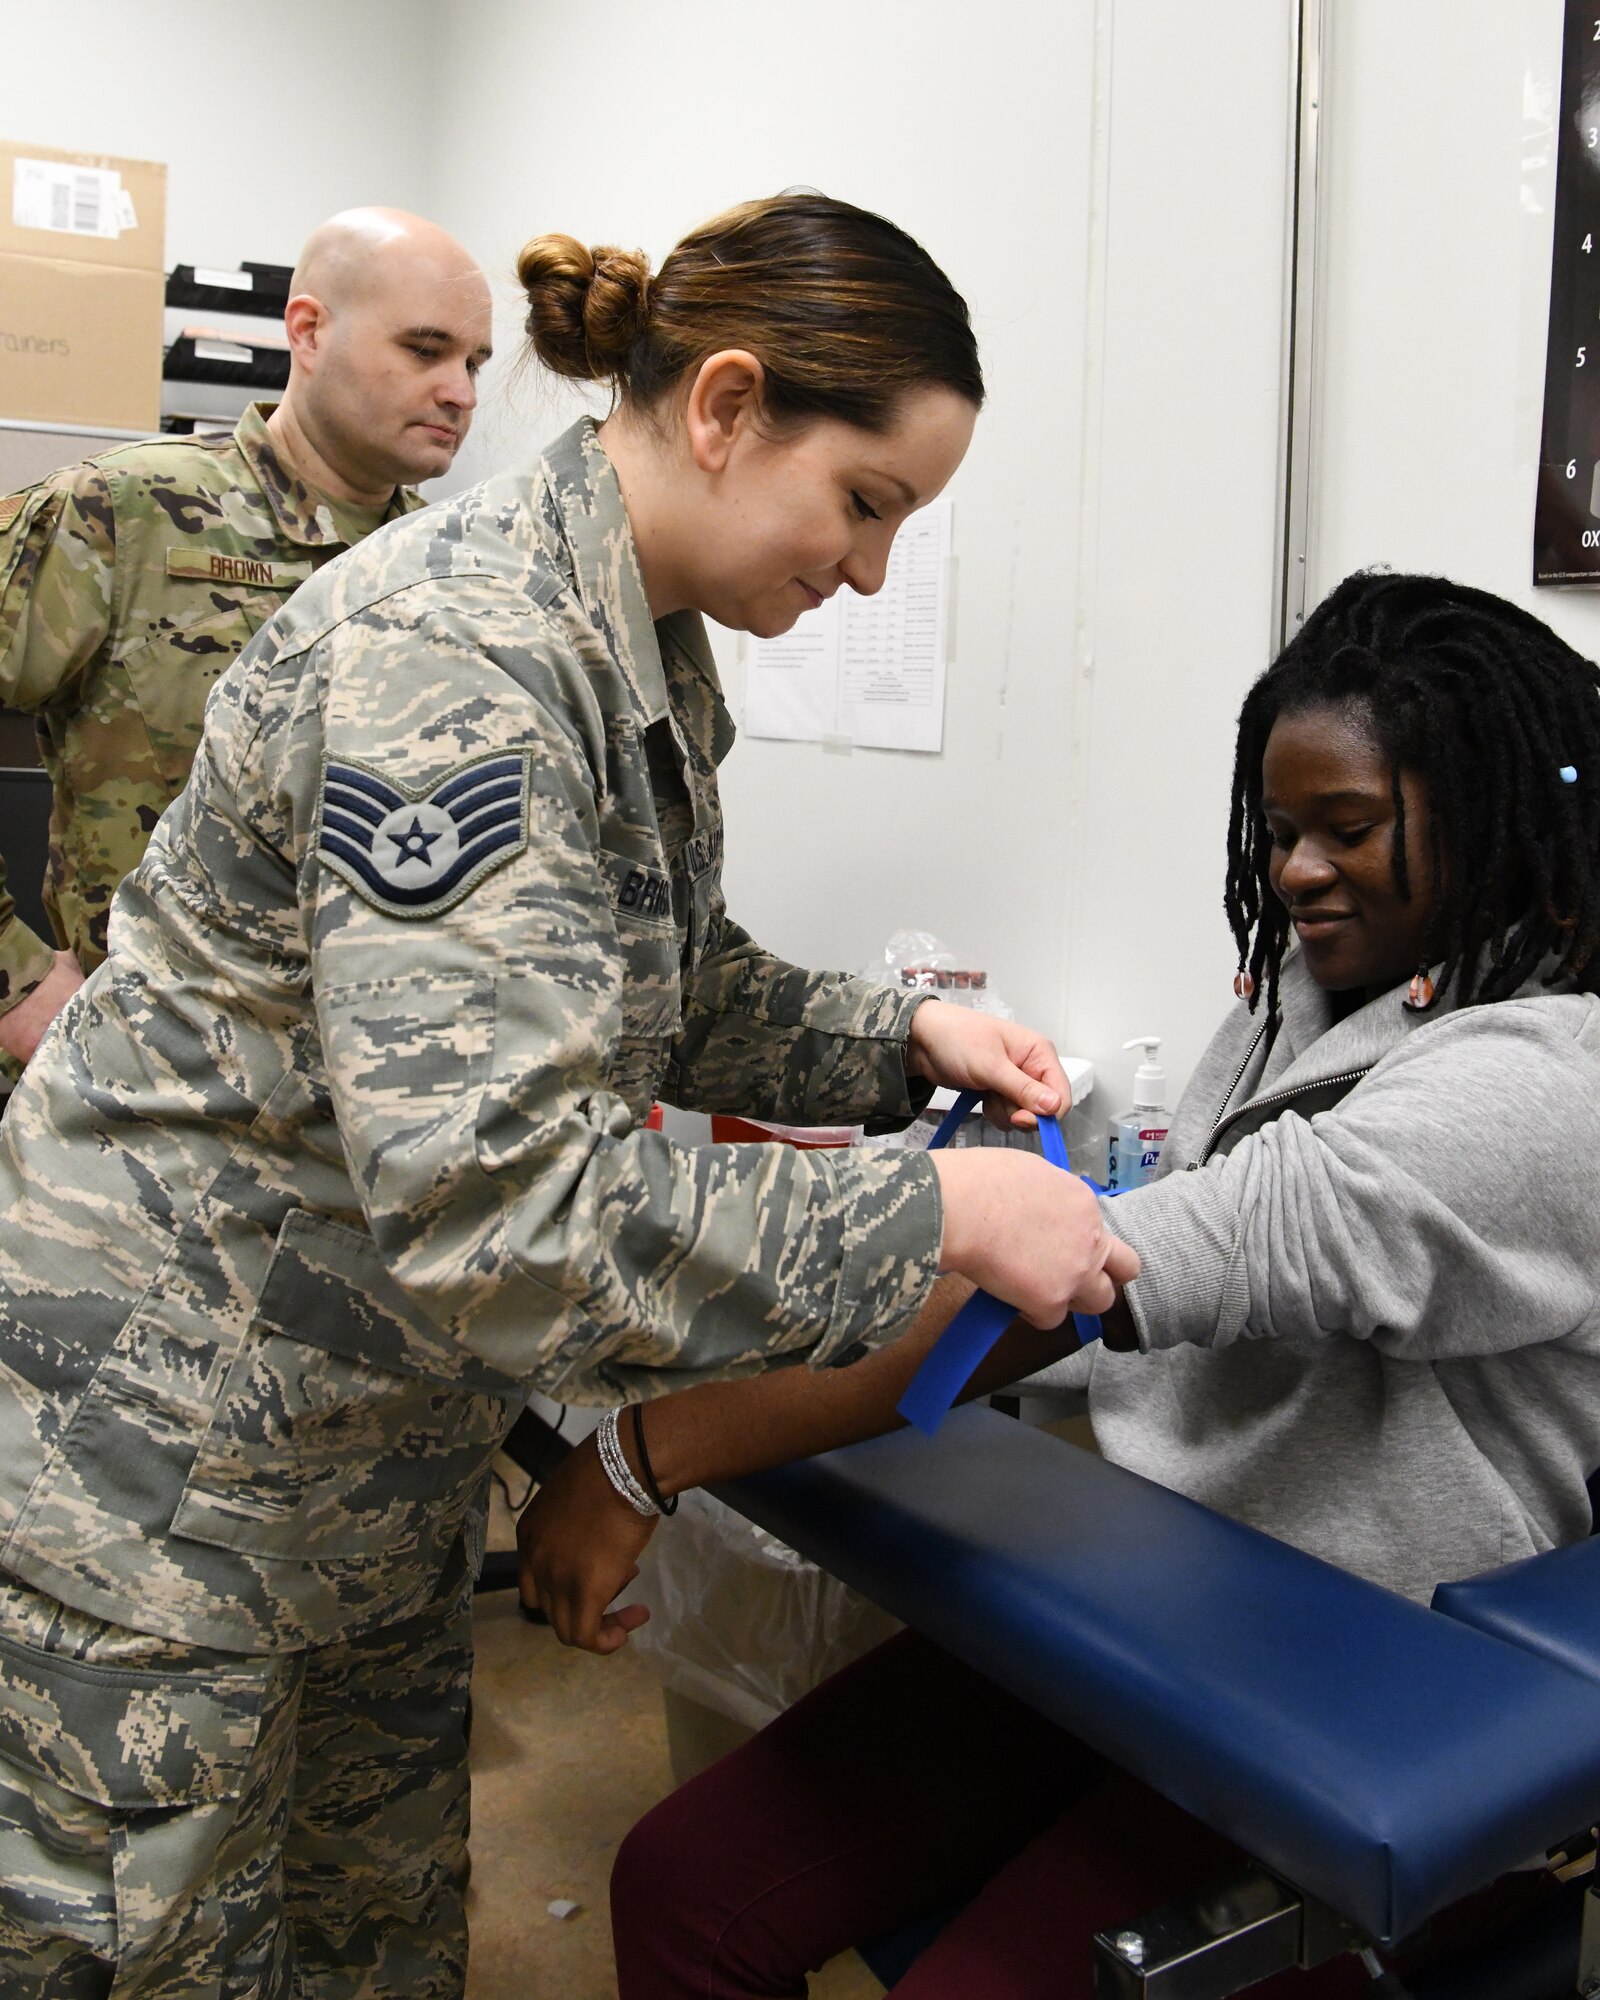 Chief Master Sgt. Jim Brown, 104th Medical Group Superintendent, works with Staff Sgt. Olivia Briggs, 104 MDG apprentice, to provide medical care. The 104th Medical Group recently got new AFSCs which will give them the opportunity to provide more focused care to Airmen.  (U.S. Air National Guard photo by Airman 1st Class Sara Kolinski)